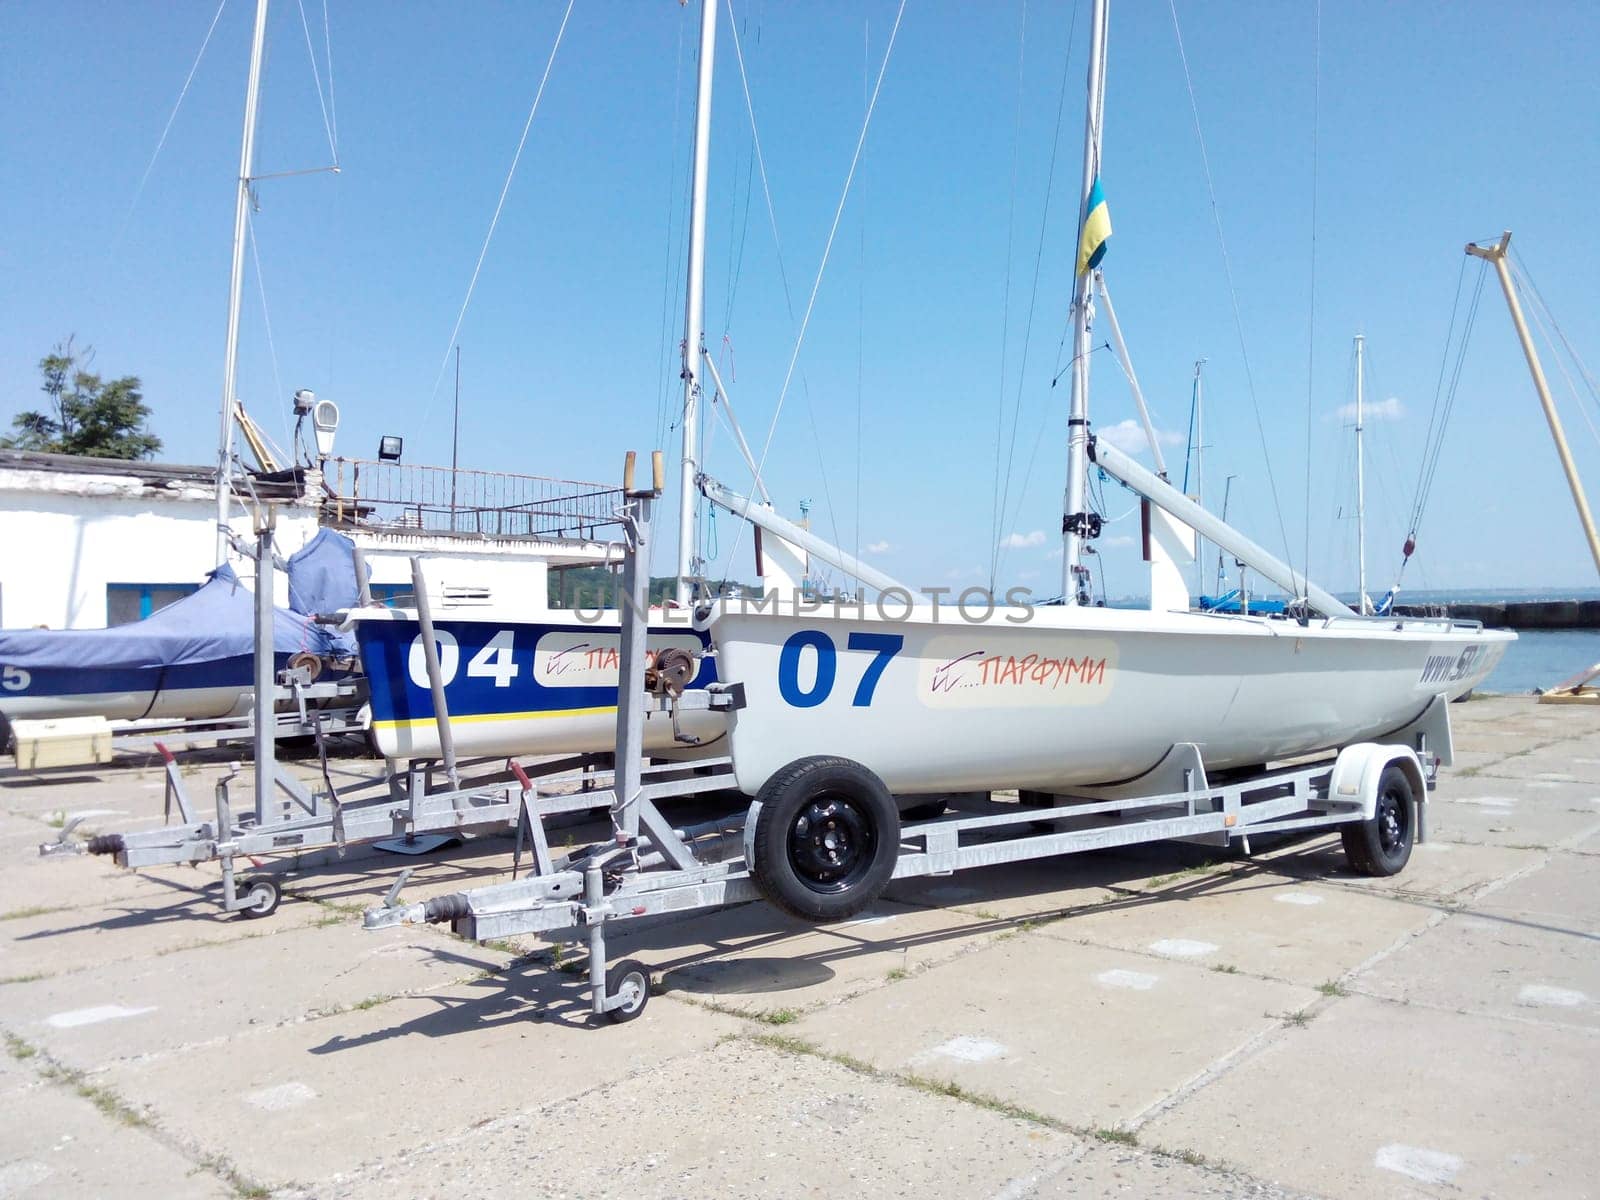 FINA's small yachts are parked on trailers in the harbor. by Maksym